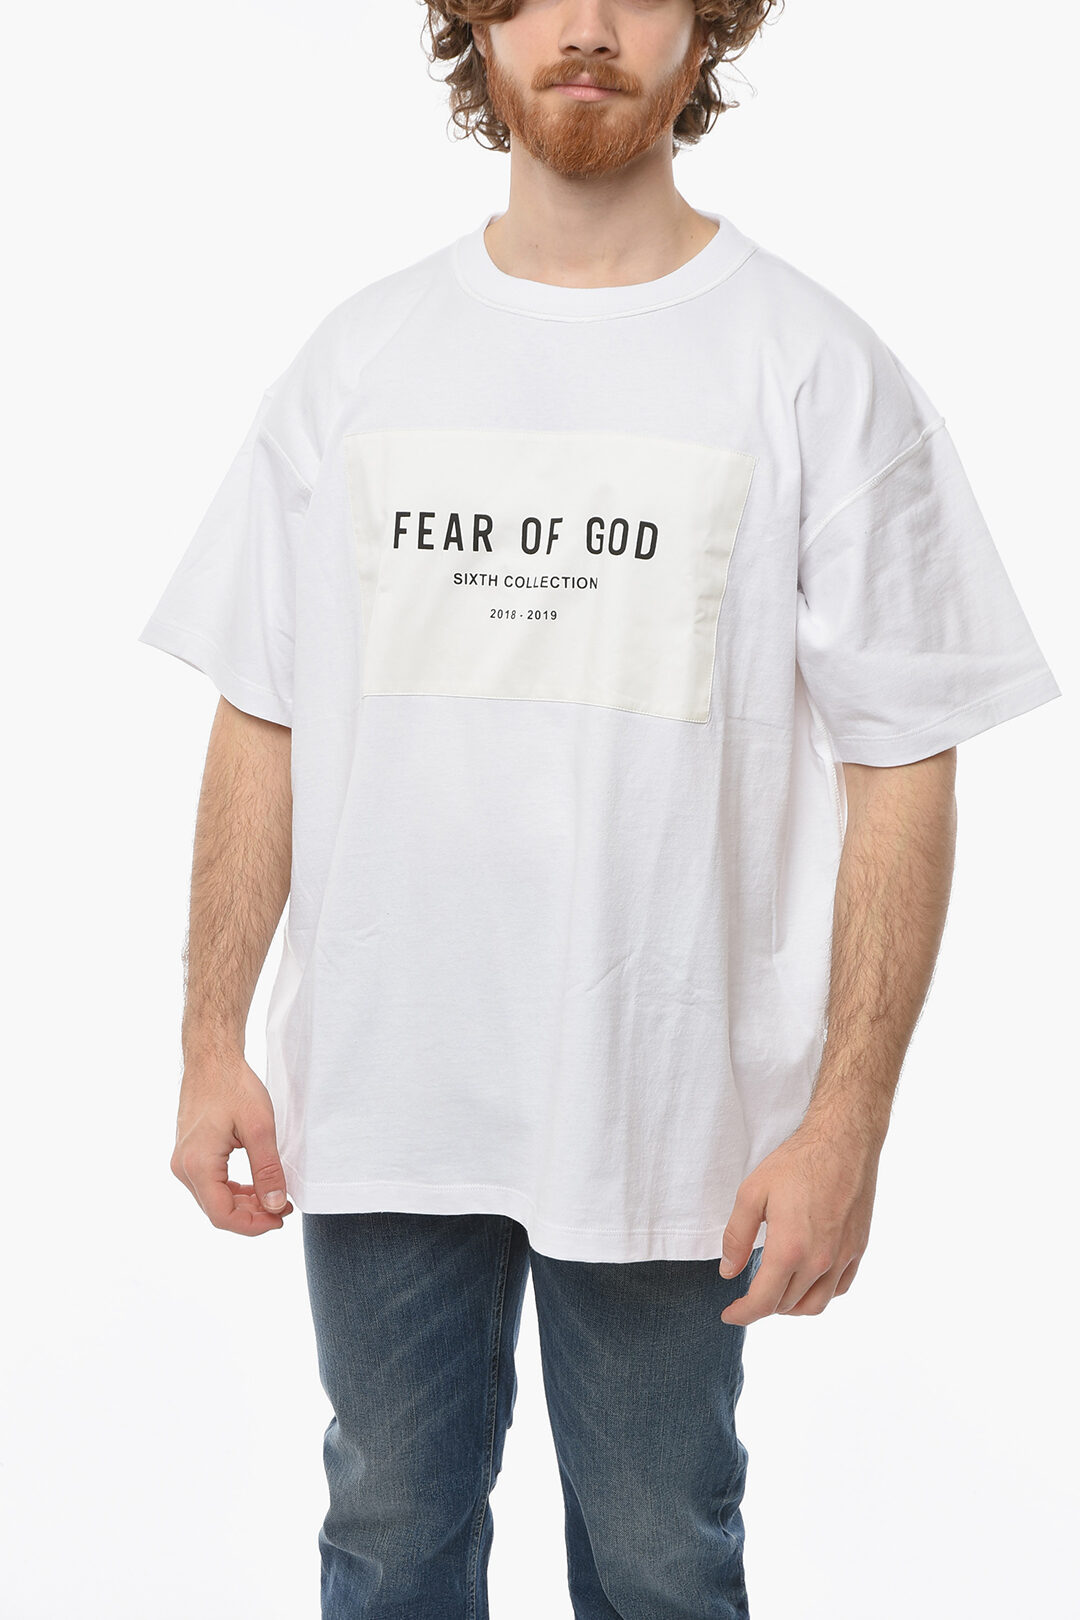 Fear Of God SIXTH COLLECTION Contrasting Printed Crew-neck T-Shirt